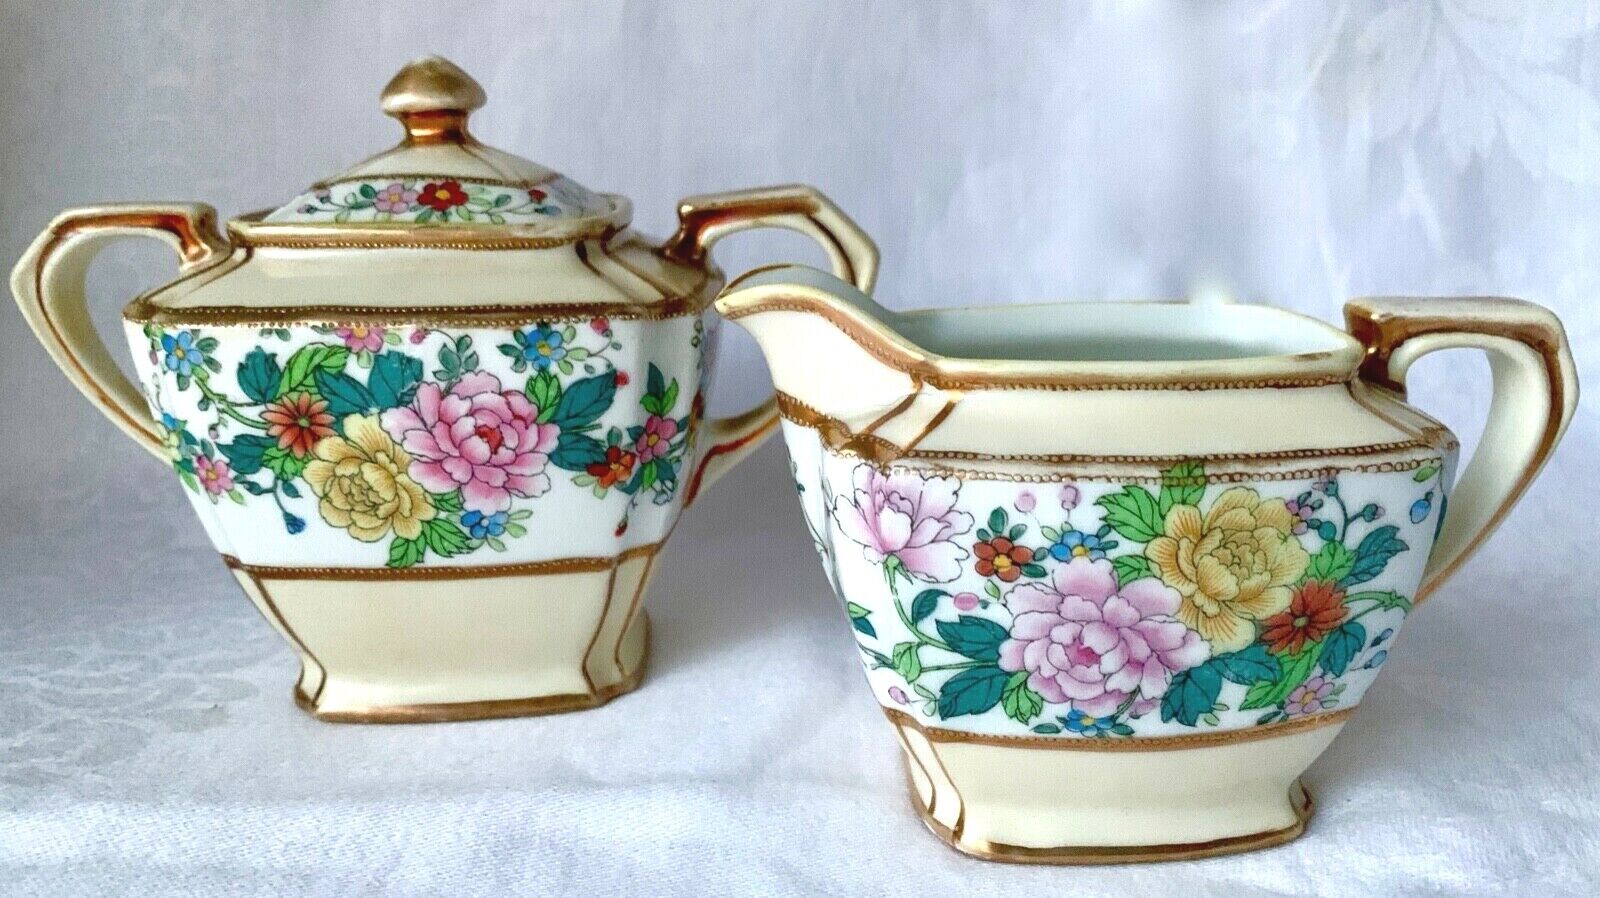 LOVELY ANTIQUE HAND PAINTED MORIMURA NIPPON FLORAL CREAMER & SUGAR BOWL 